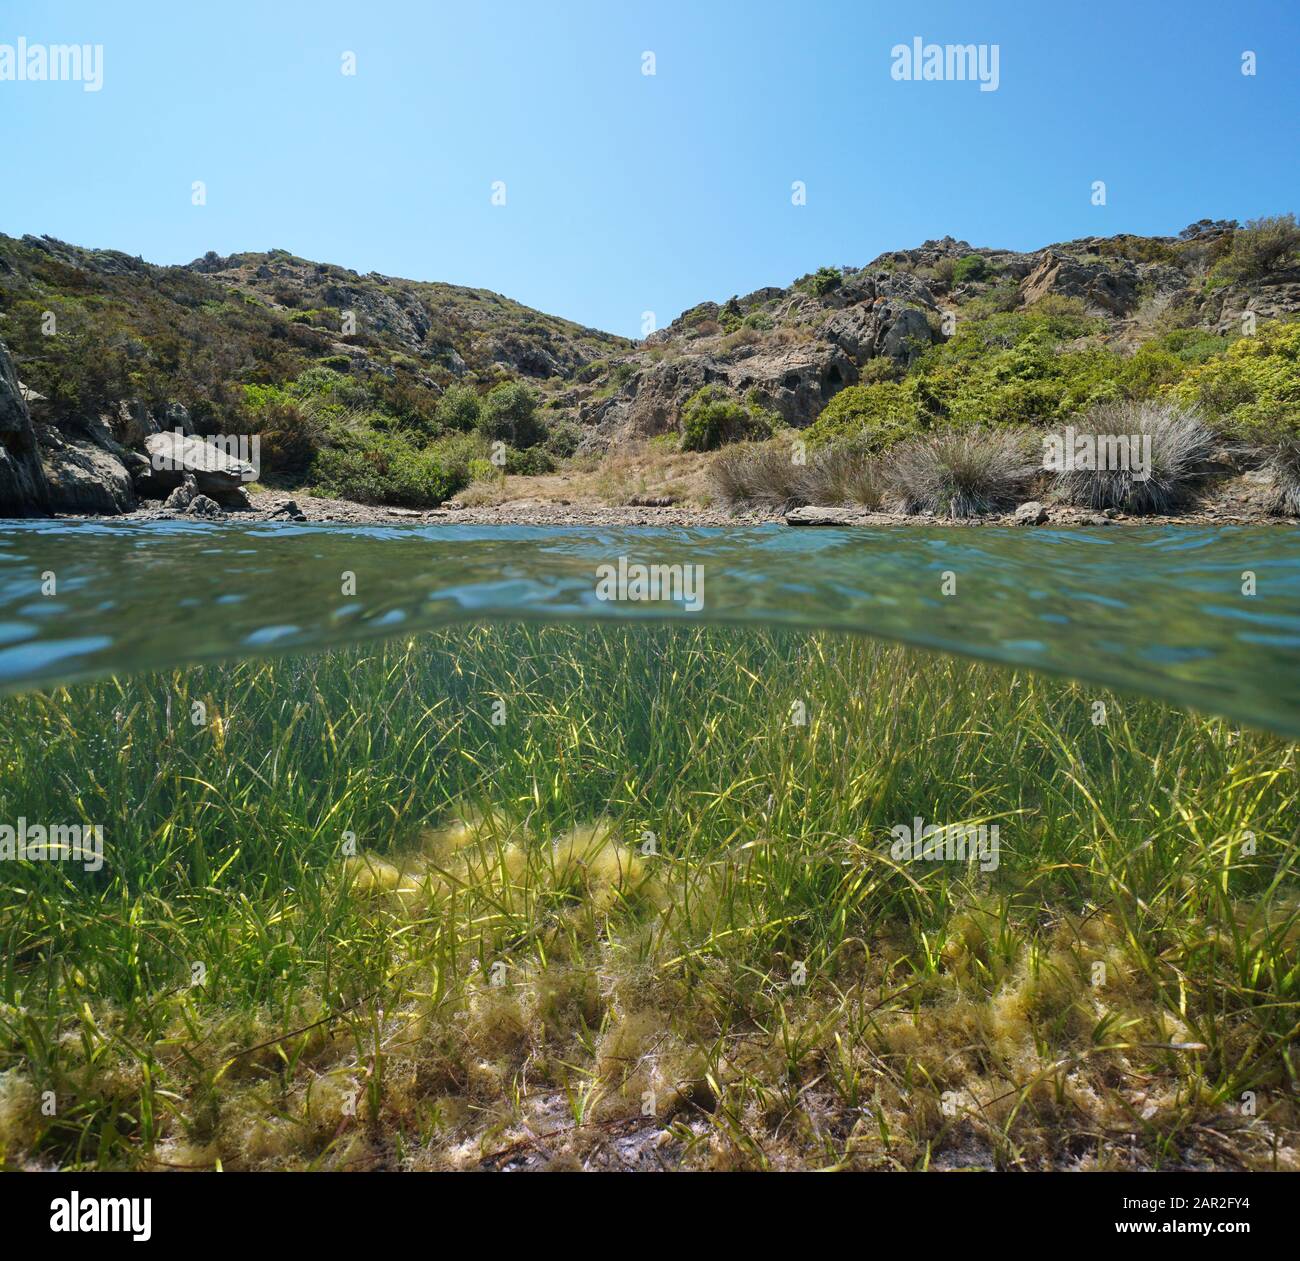 Mediterranean shore in a small secluded cove with sea grass Cymodocea nodosa underwater, split view over and under water surface, Spain, Costa Brava Stock Photo